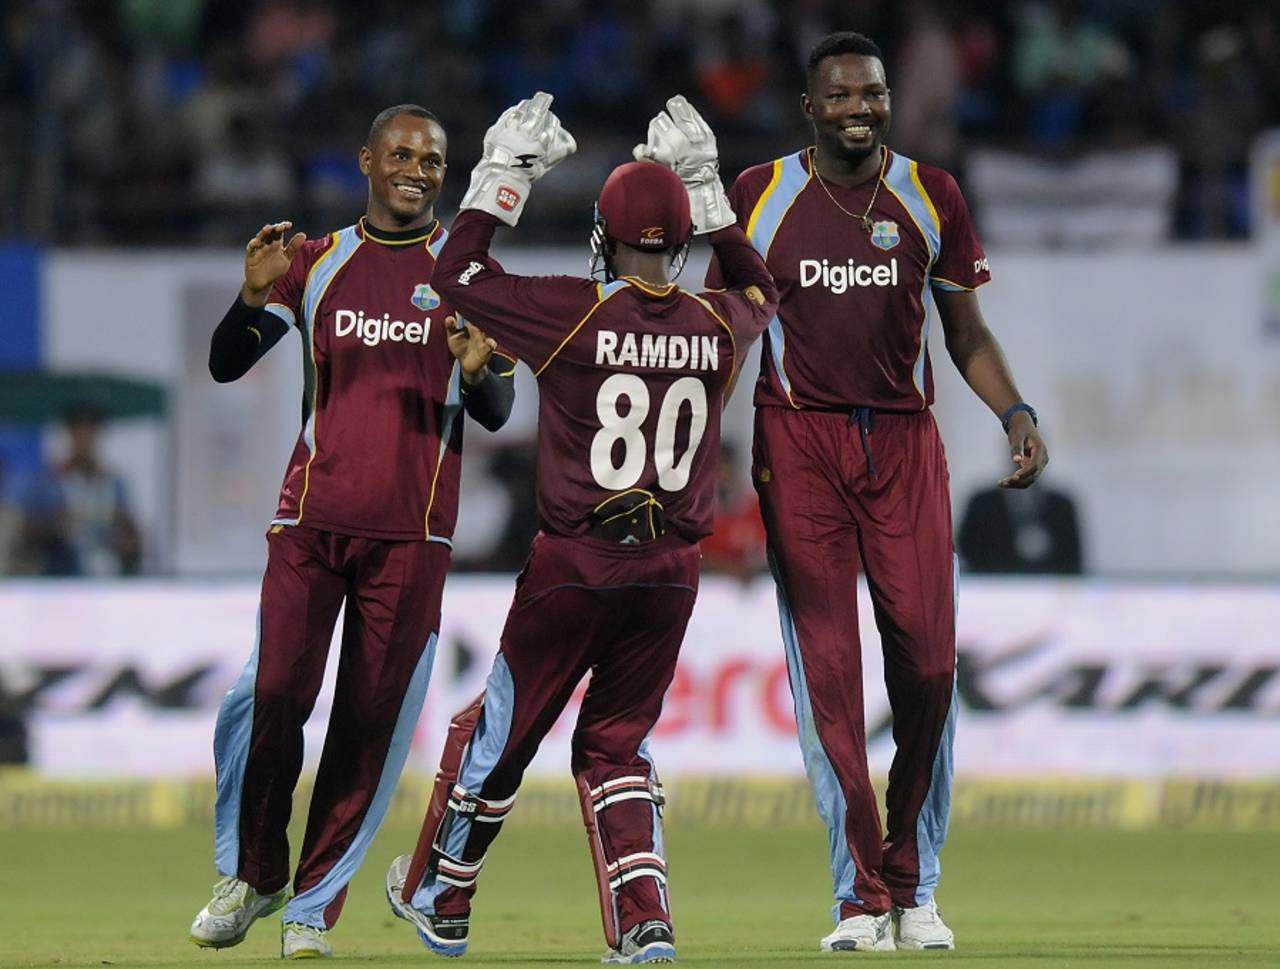 Marlon Samuels took two wickets, India v West Indies, 1st ODI, Kochi, October 8, 2014